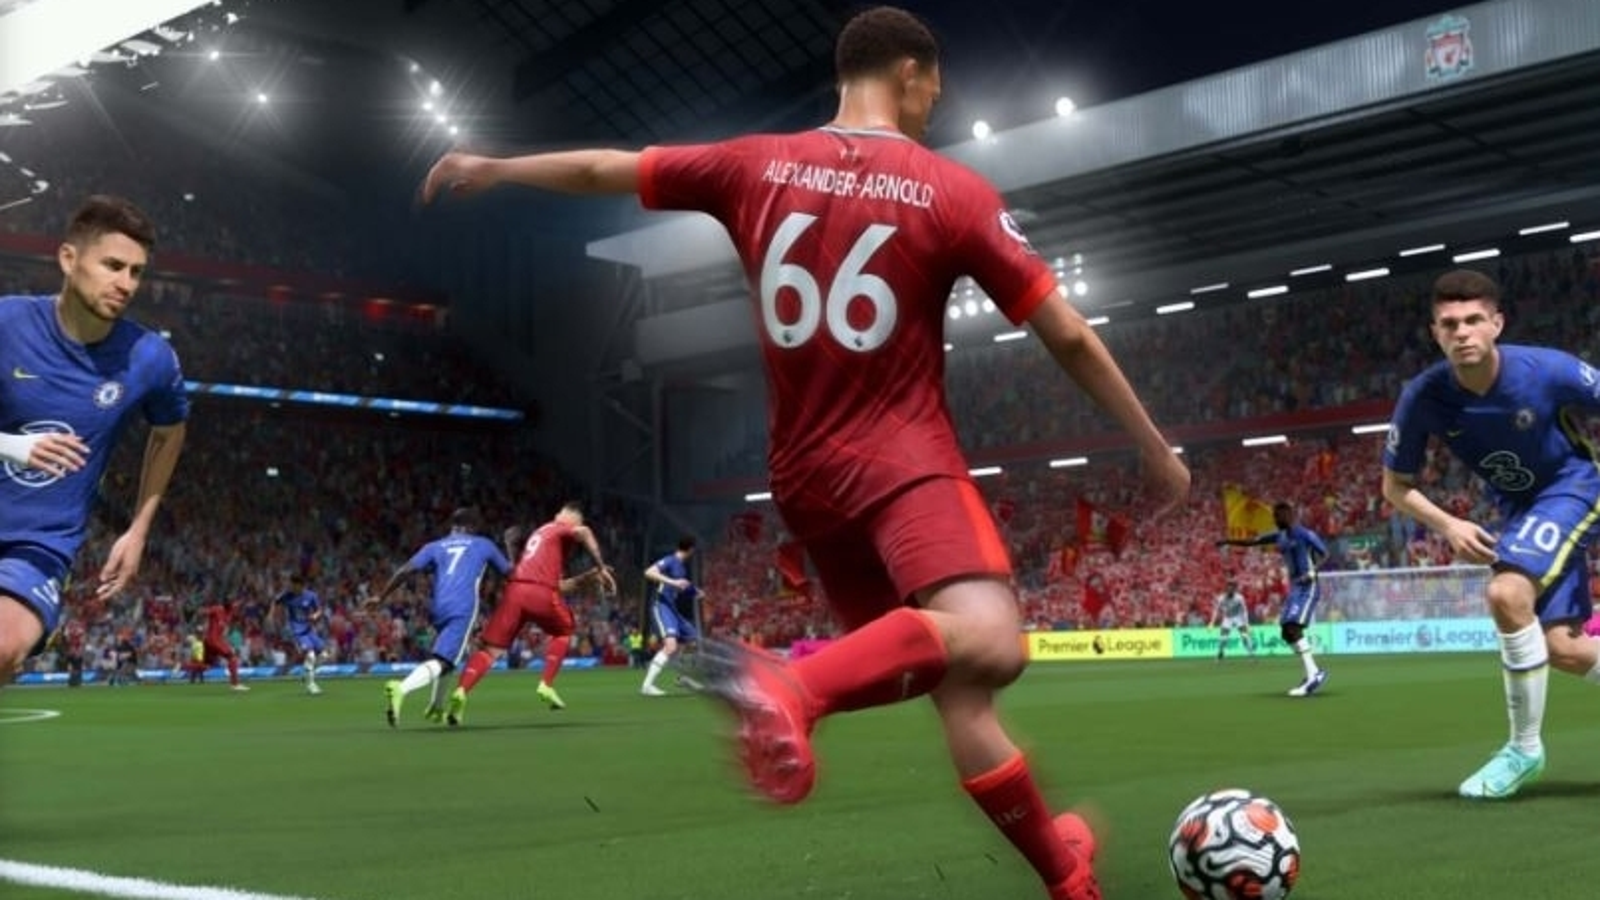 FIFA 23 best defenders: The best CB, RB, and LB players